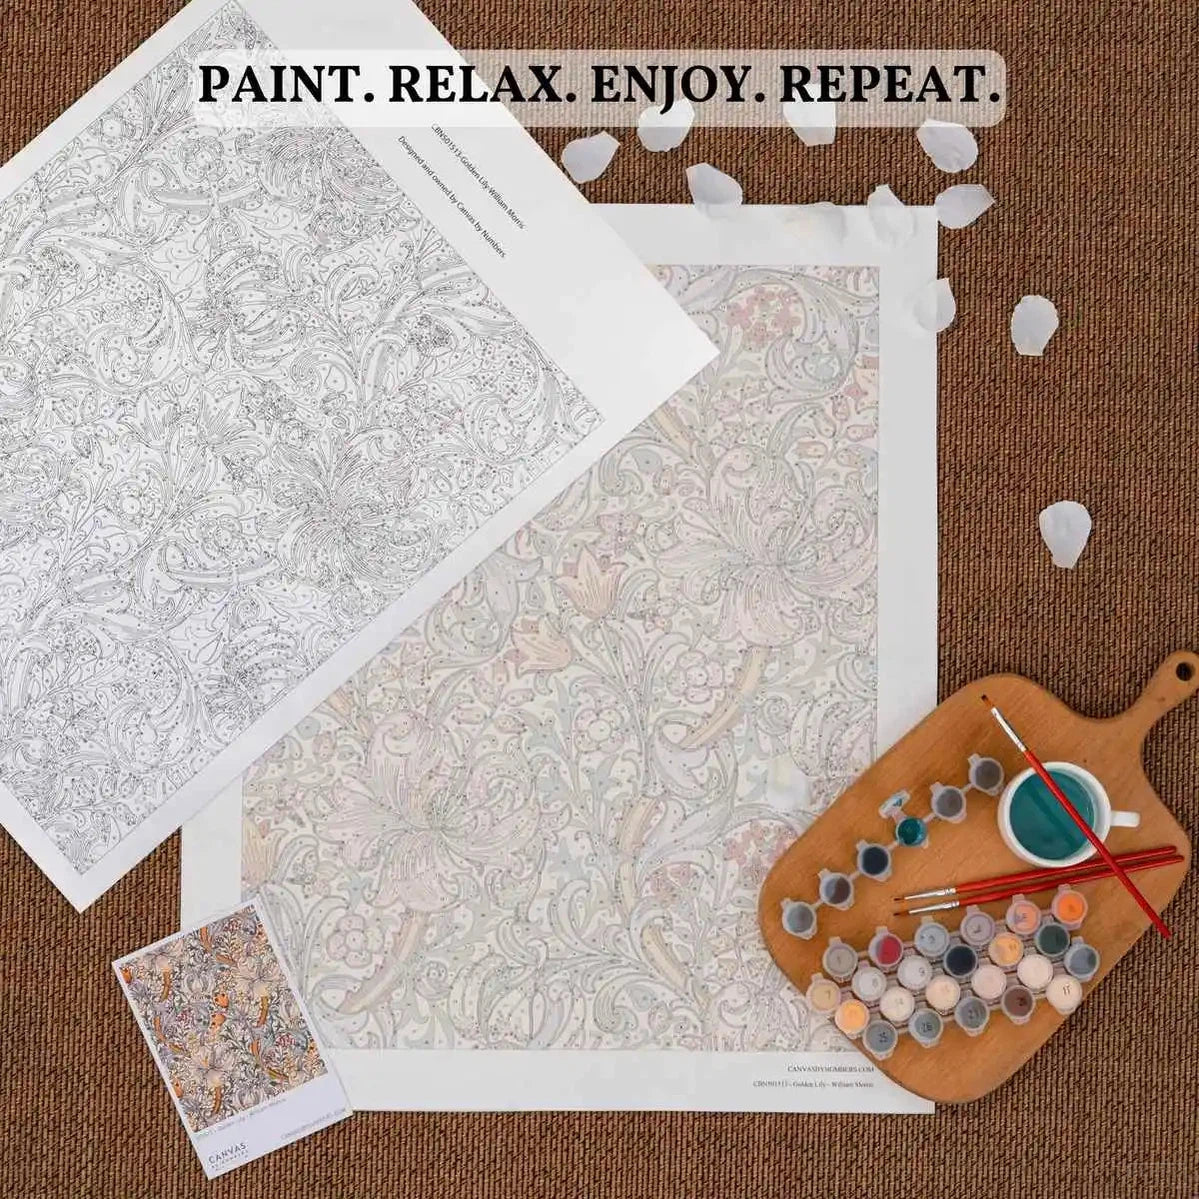 Poinsettias - Paint by Numbers-Craft a Yuletide floral masterpiece with our 'Poinsettias' paint by numbers kit. A delightful art activity to welcome the festive cheer.-Canvas by Numbers